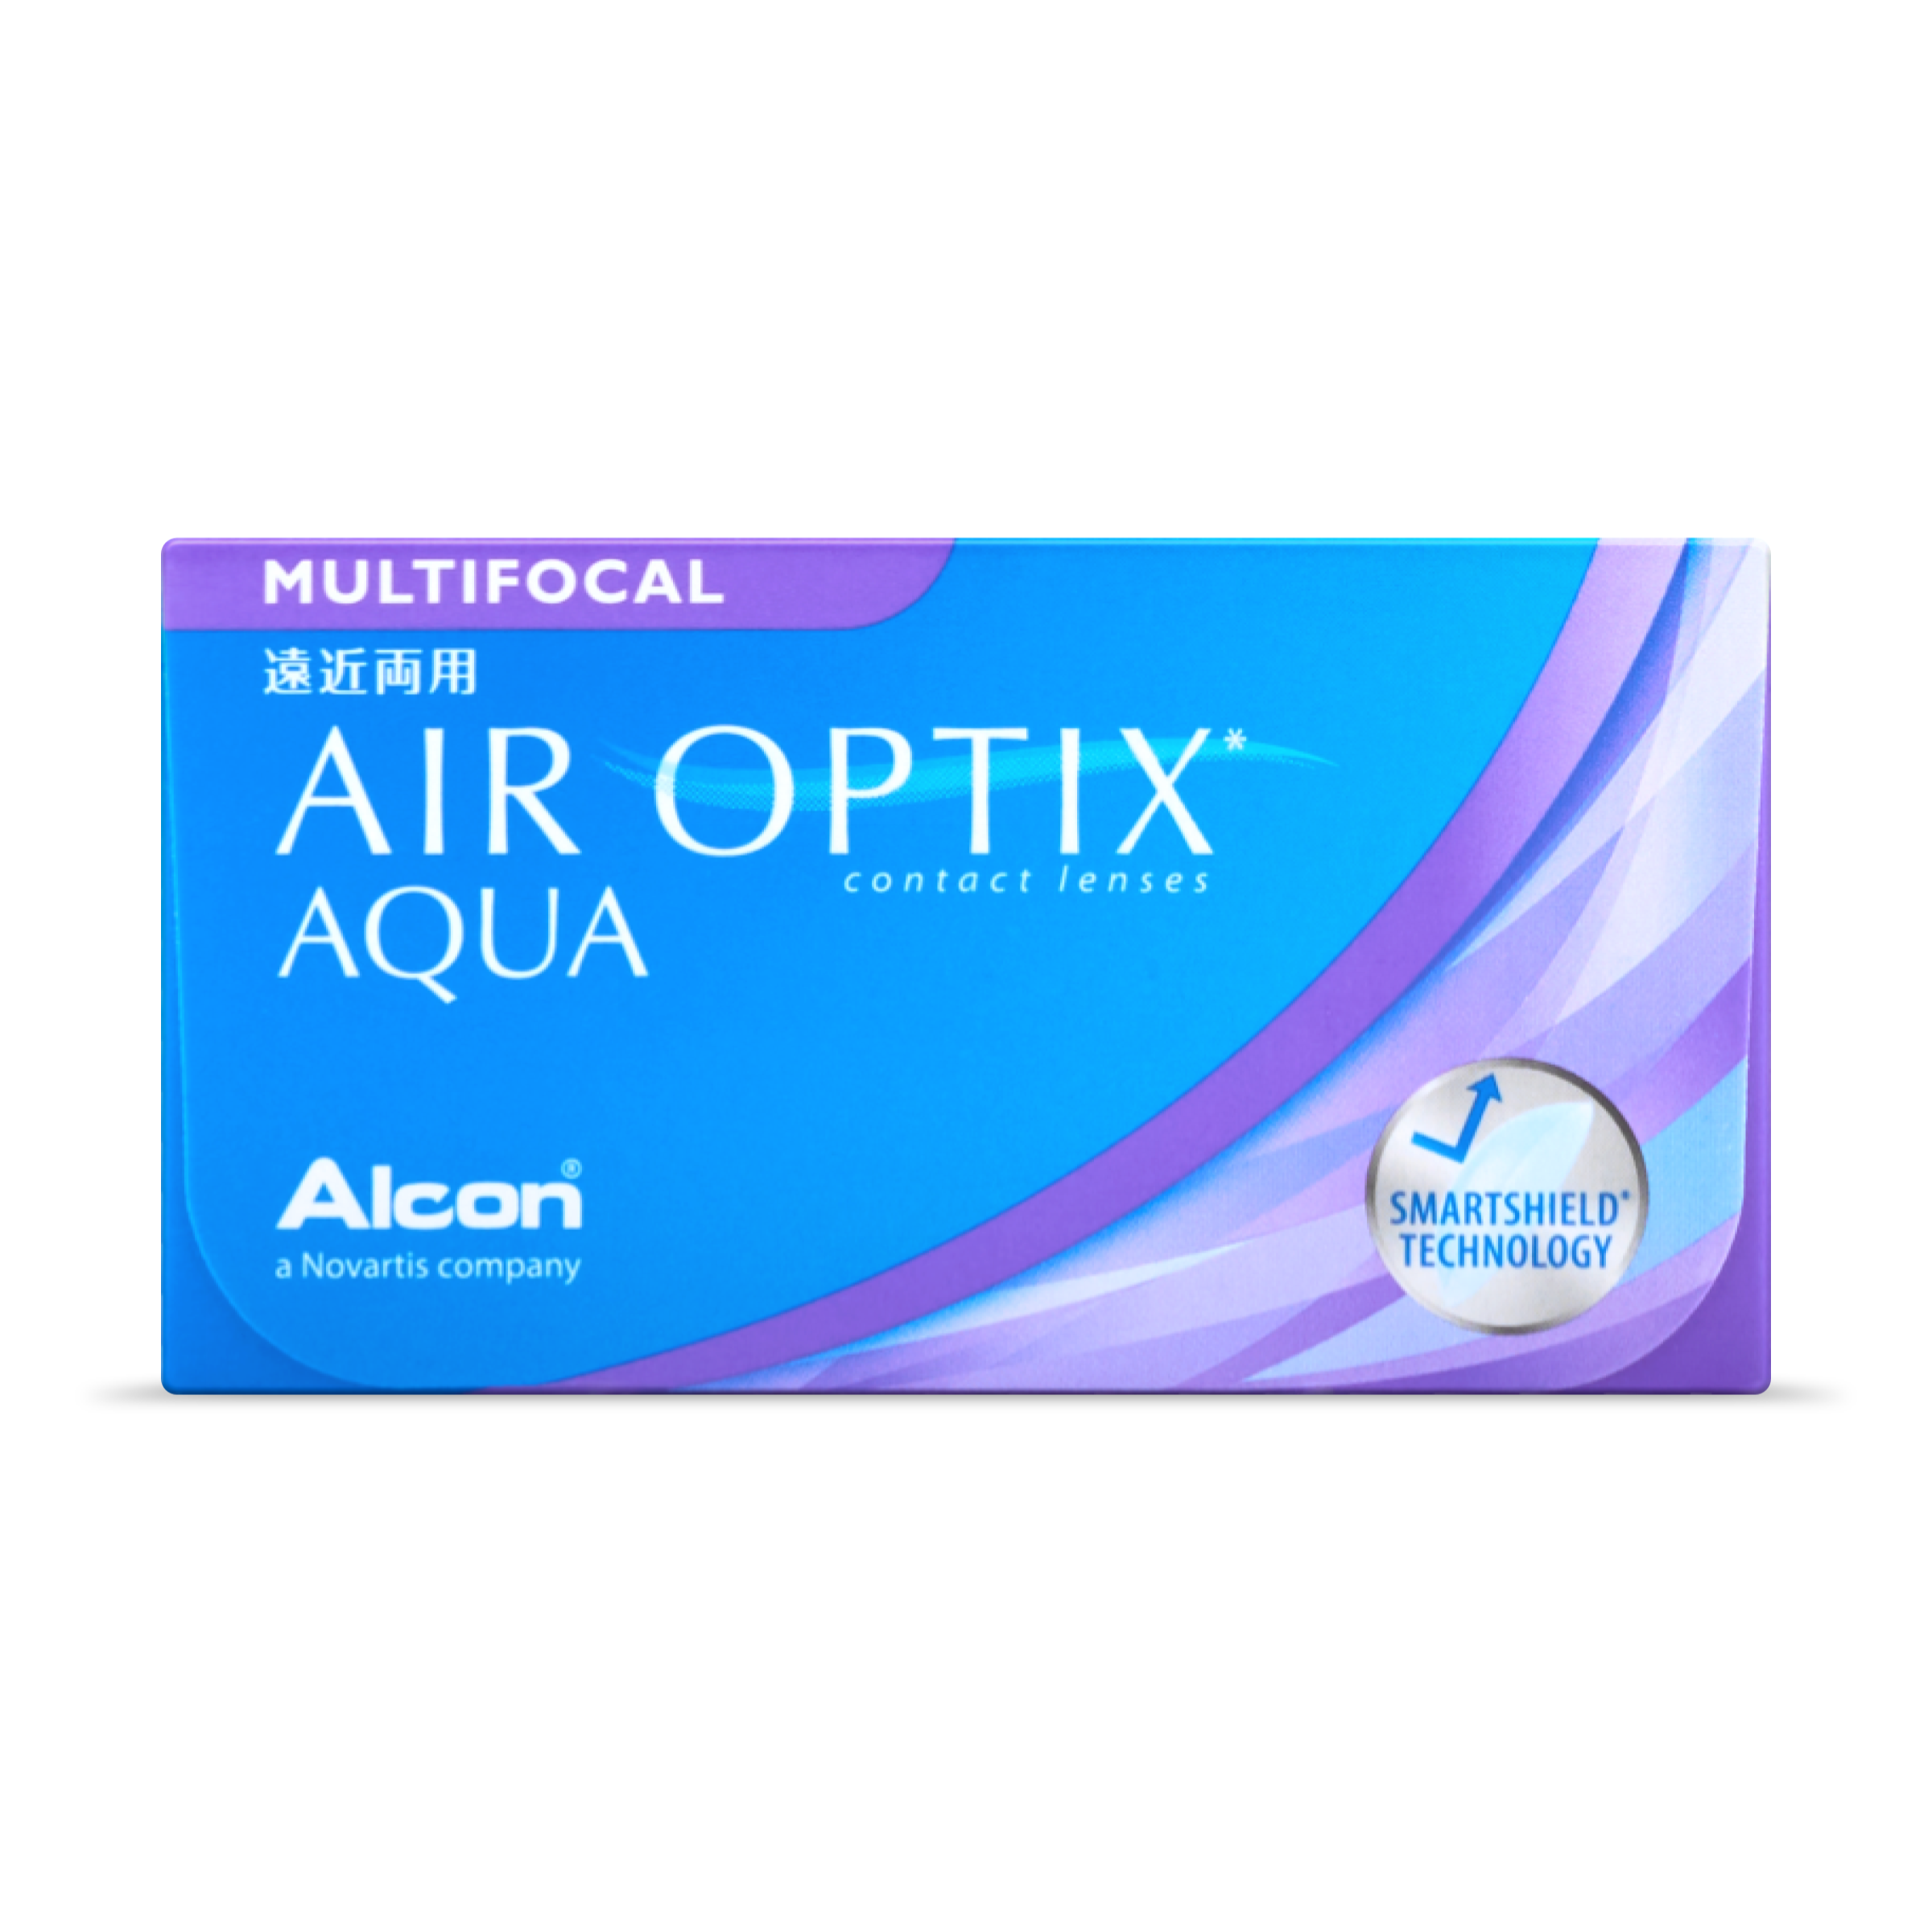 air-optix-aqua-multifocal-contact-lens-6-lens-pack-for-monthly-use